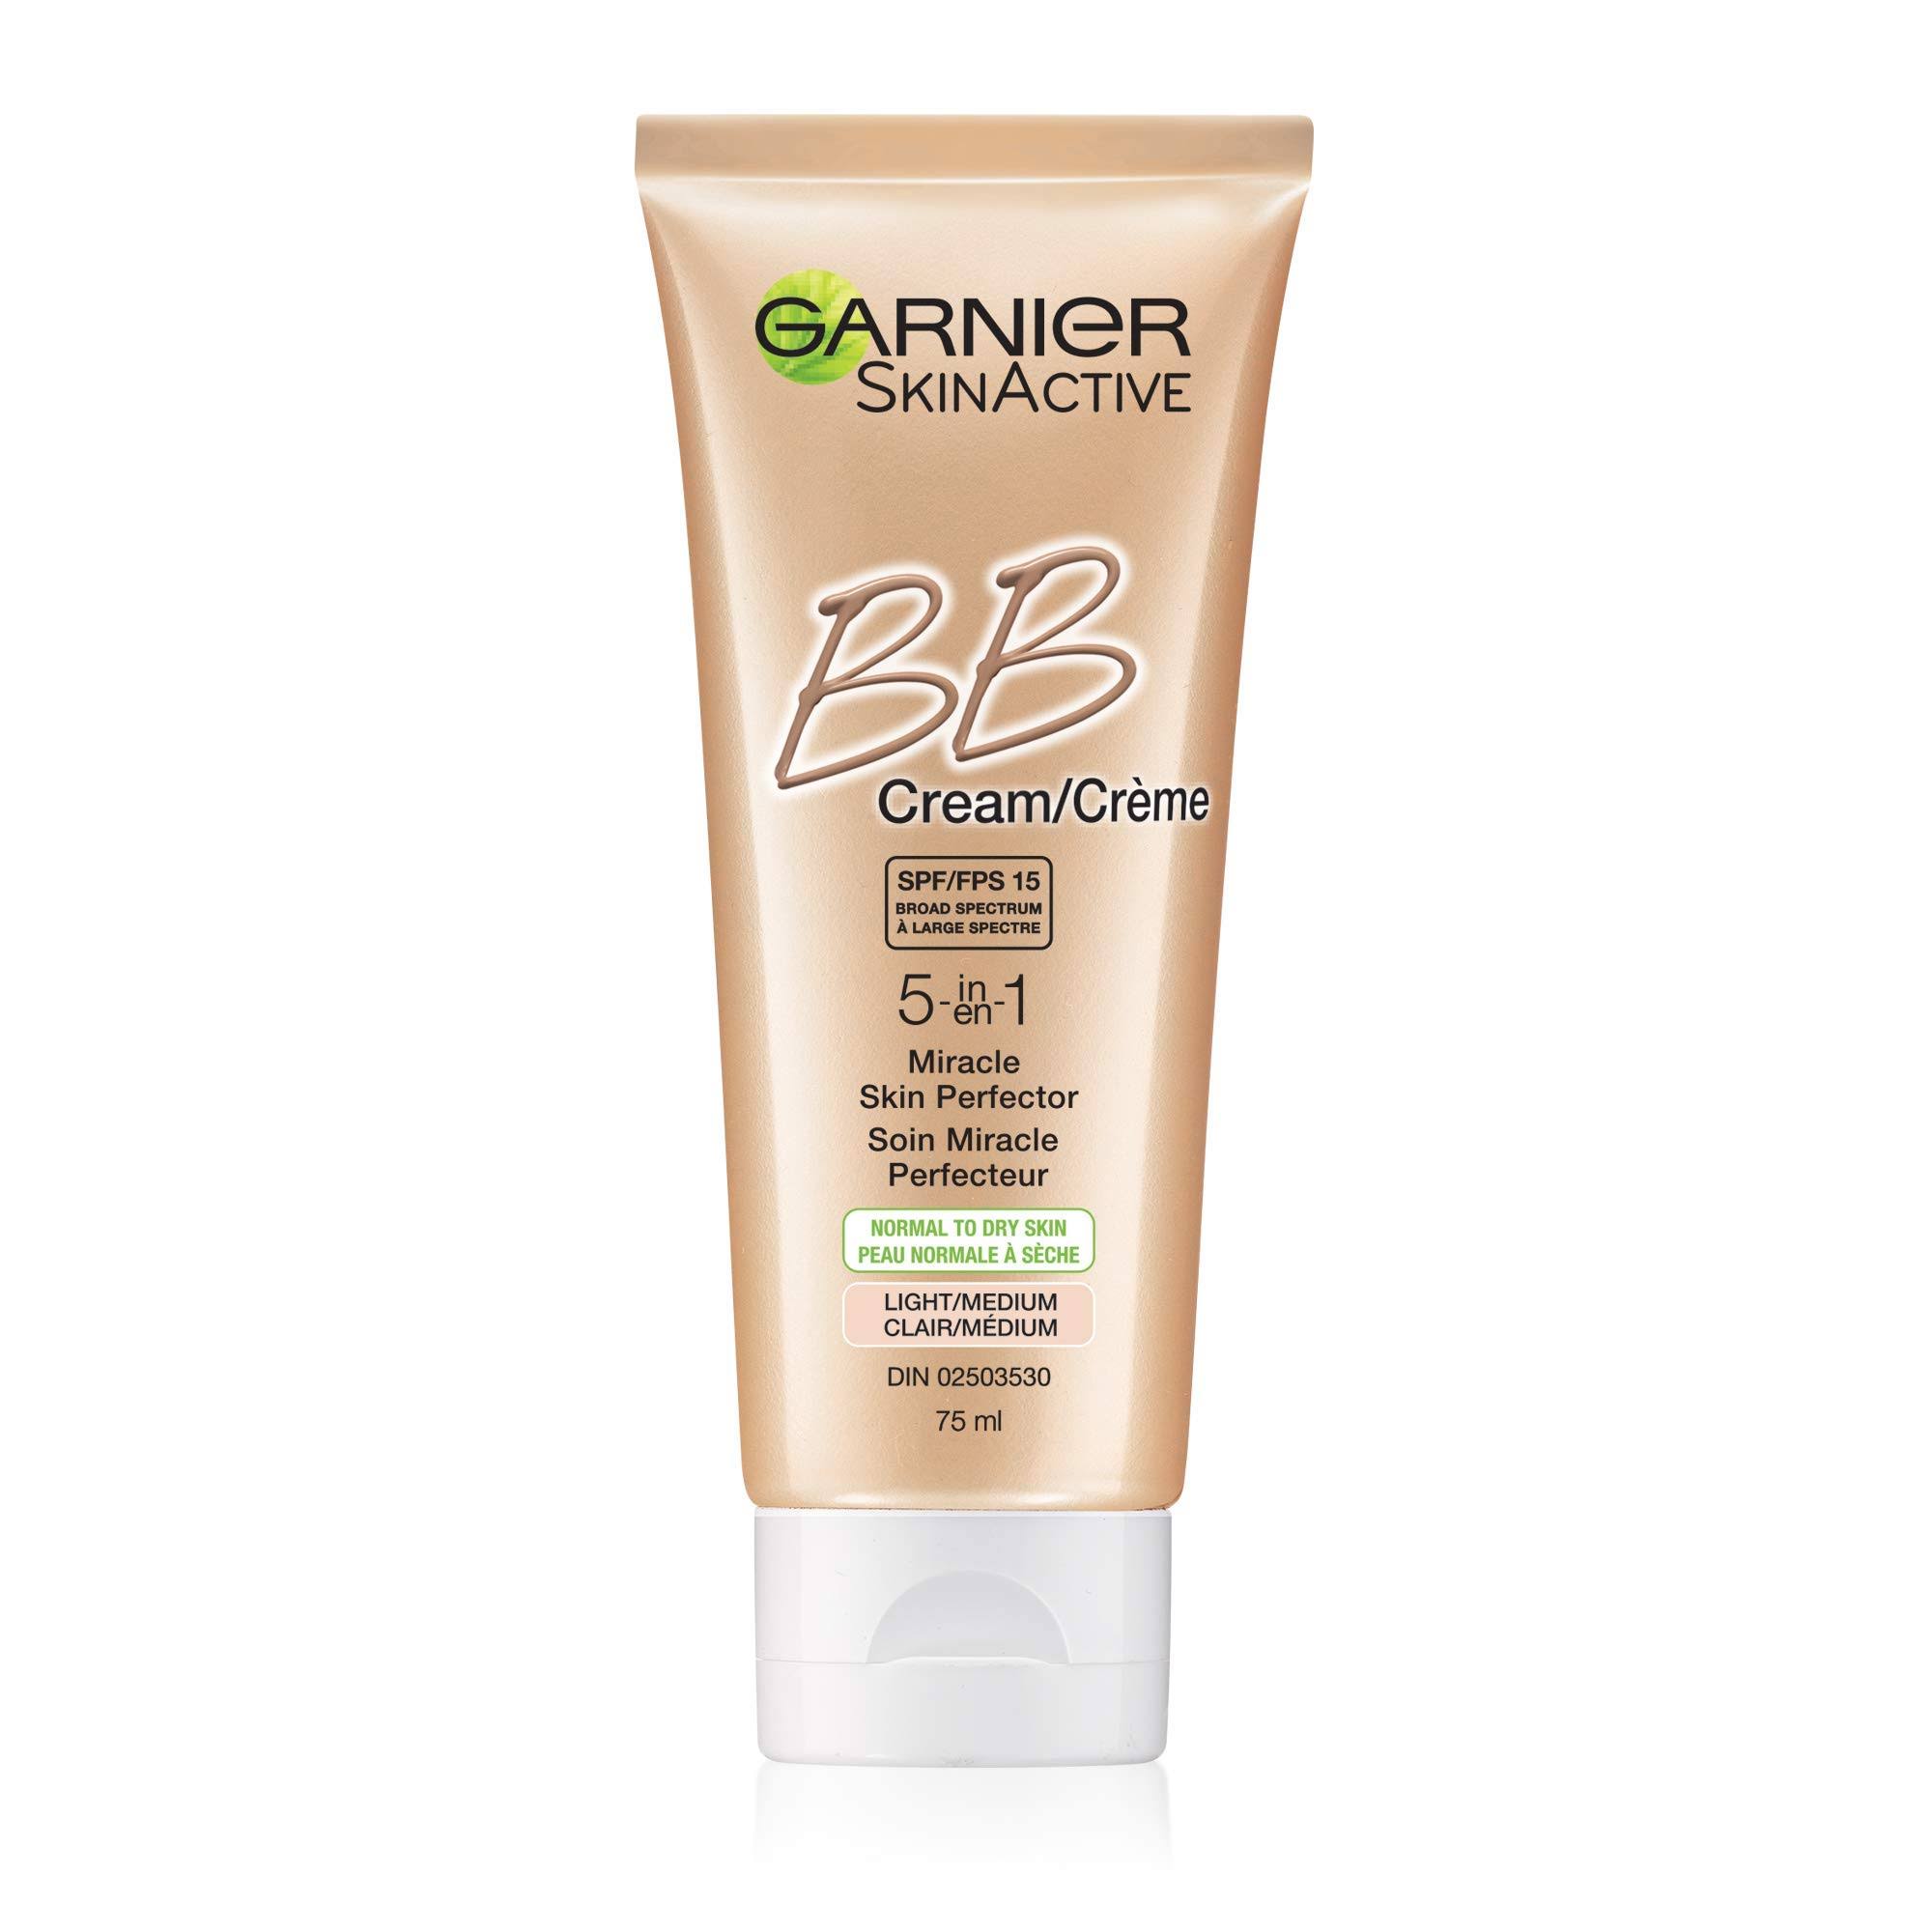 Garnier BB Cream 5-in-1 for Normal to Dry Skin with SPF 15, Light to Medium (75mL)